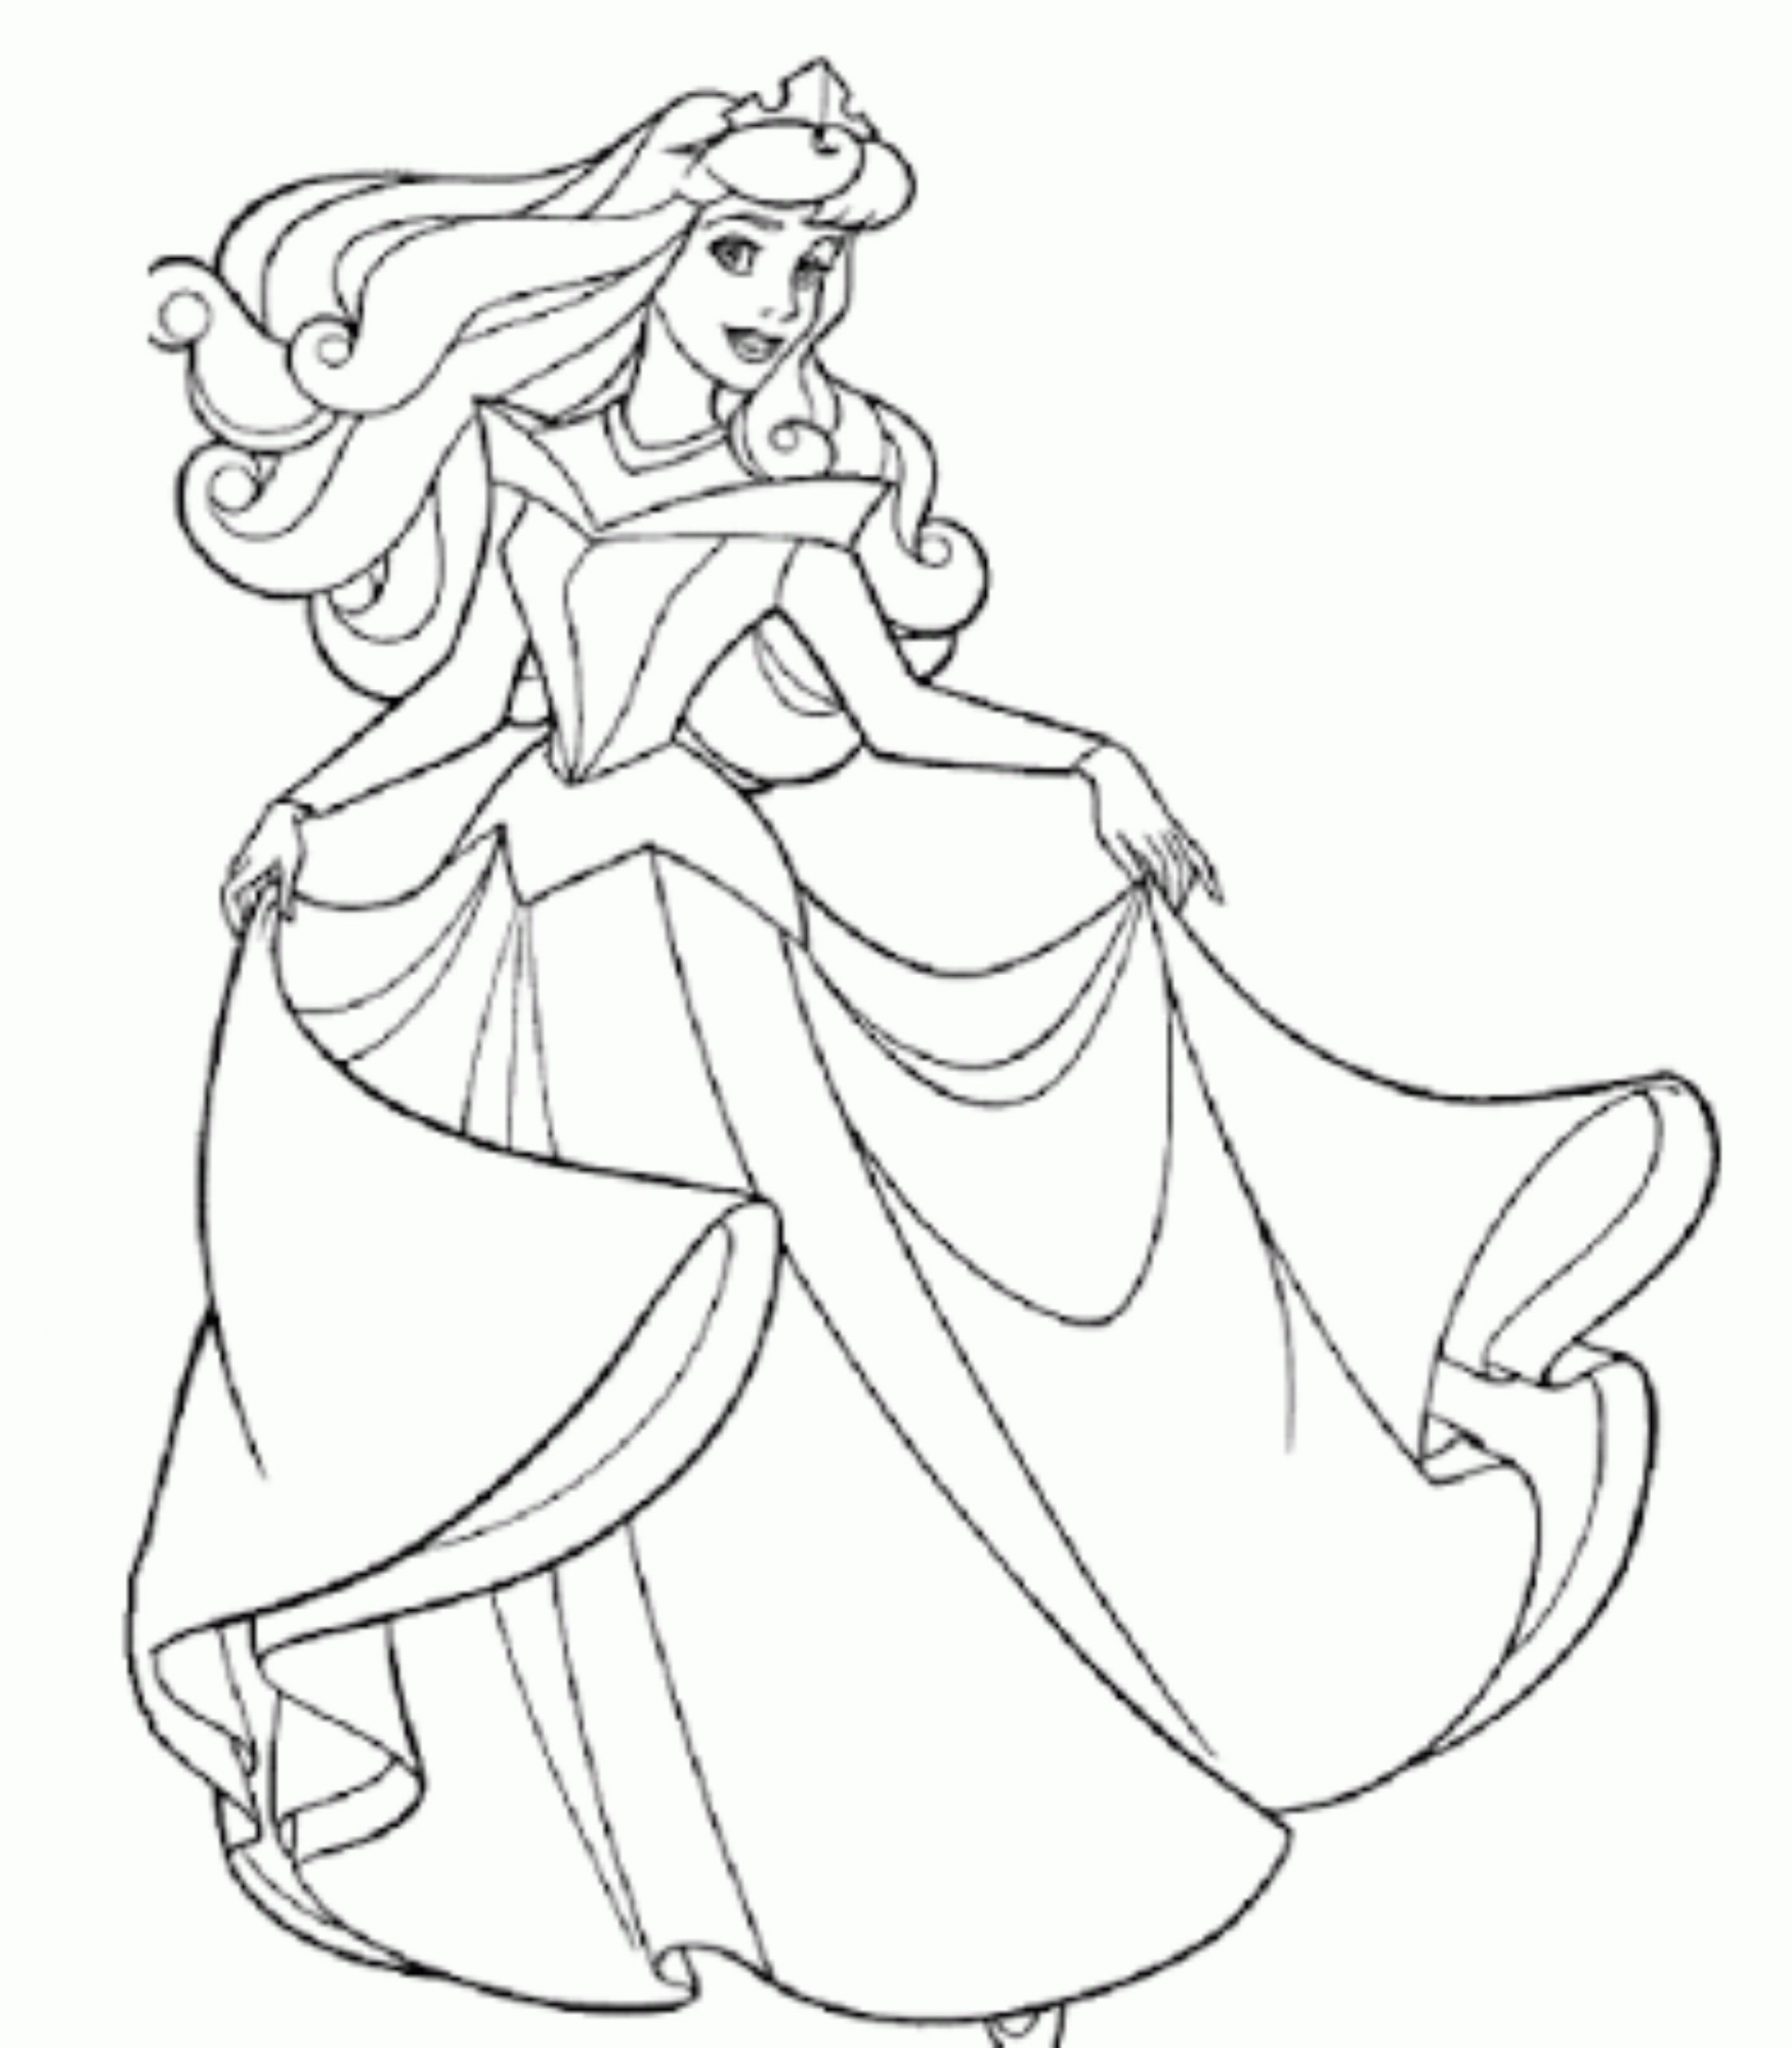 Print & Download   Princess Coloring Pages, Support The Child’s Activity